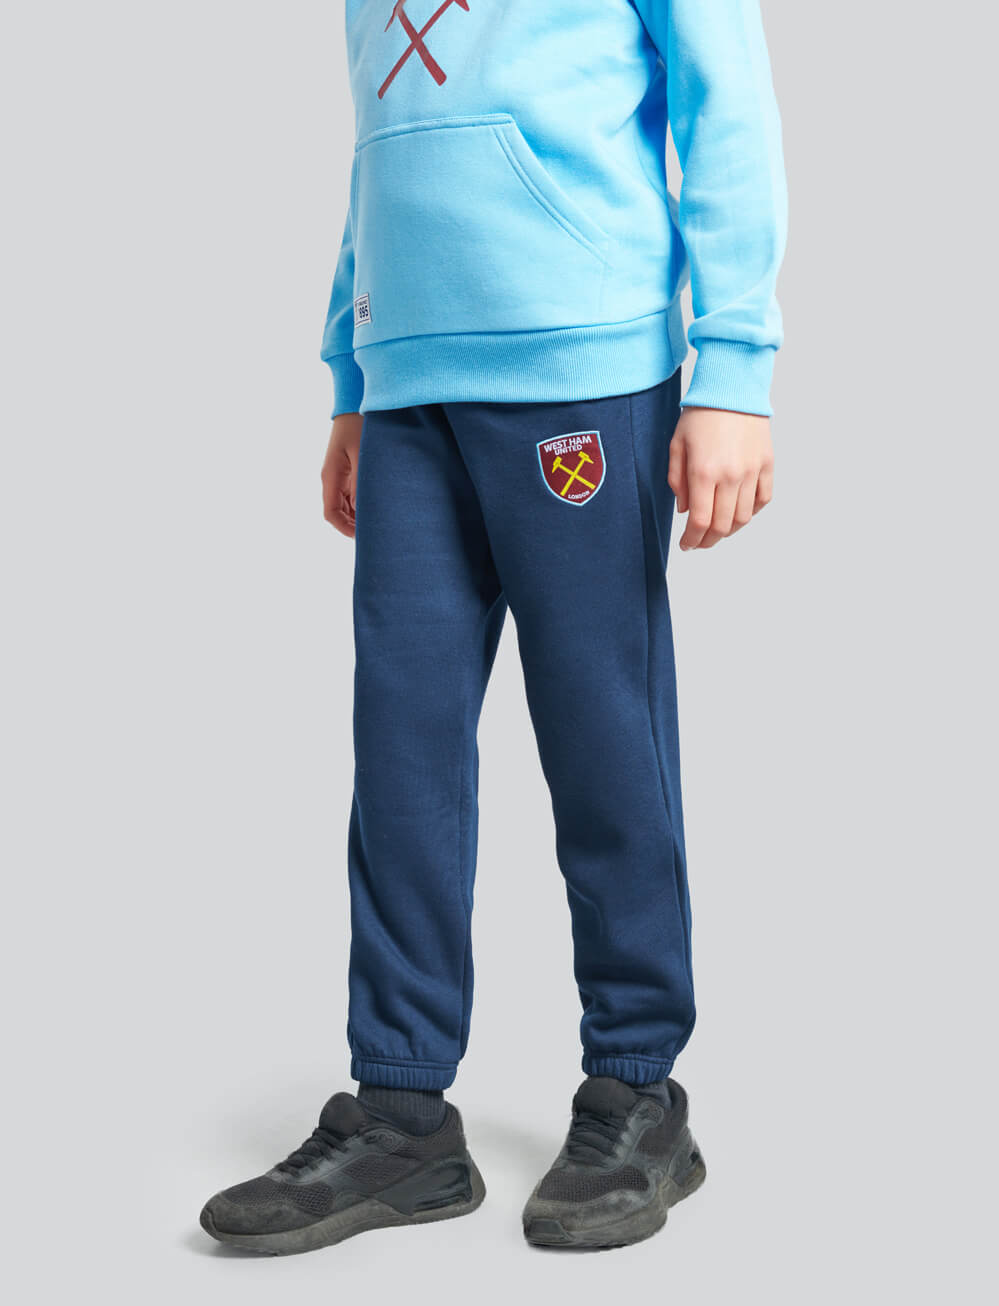 Official West Ham United Kids Joggers - Navy - The World Football Store